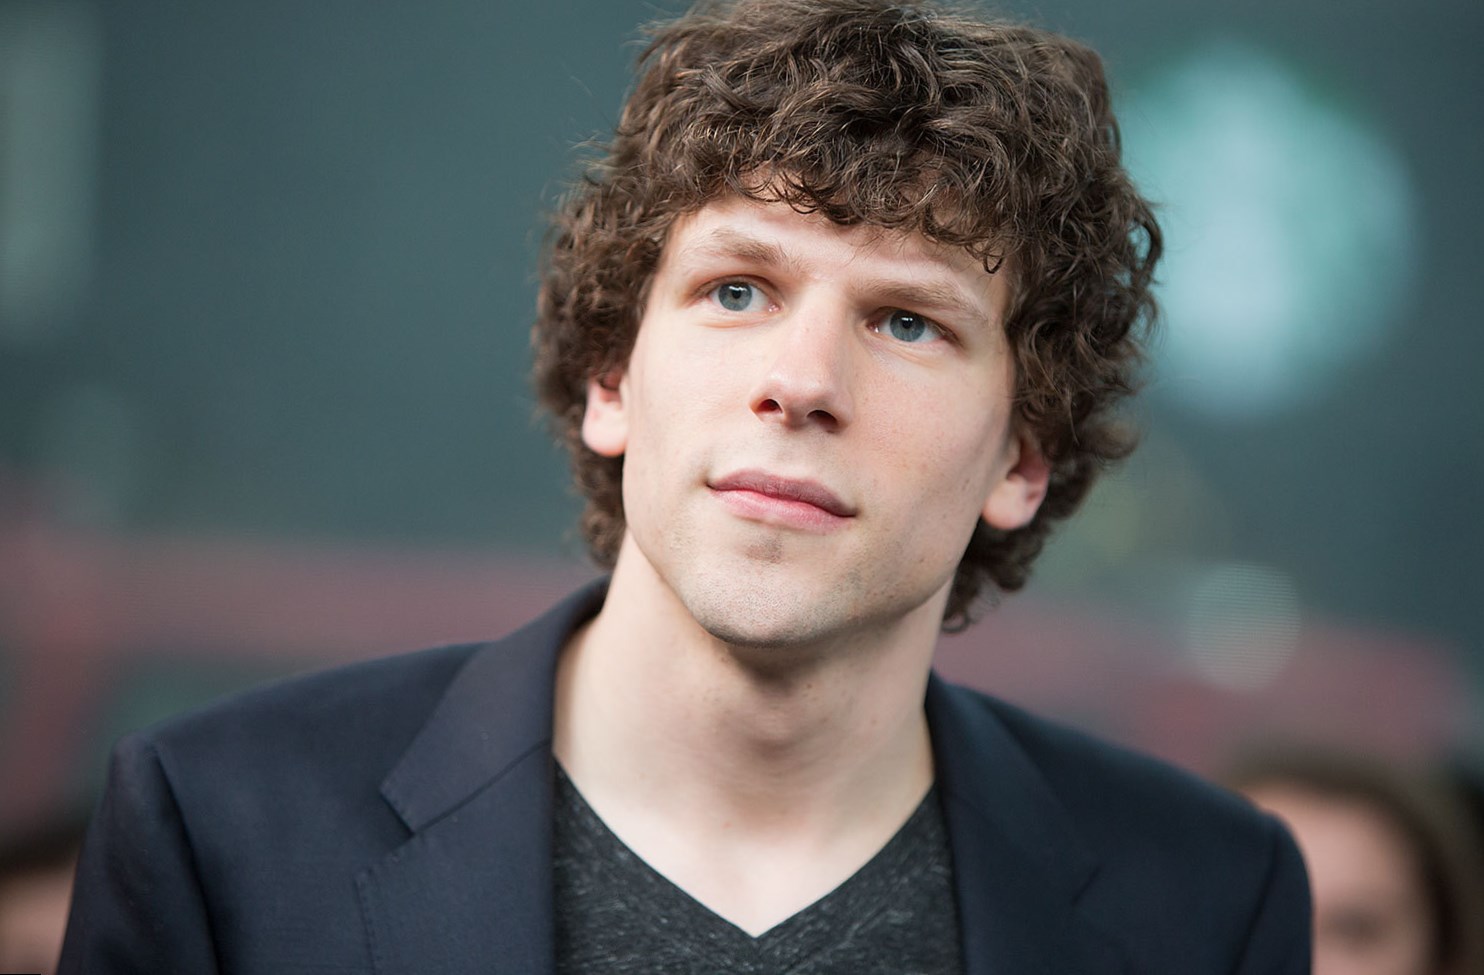 Jesse Eisenberg Best Movies and TV Shows